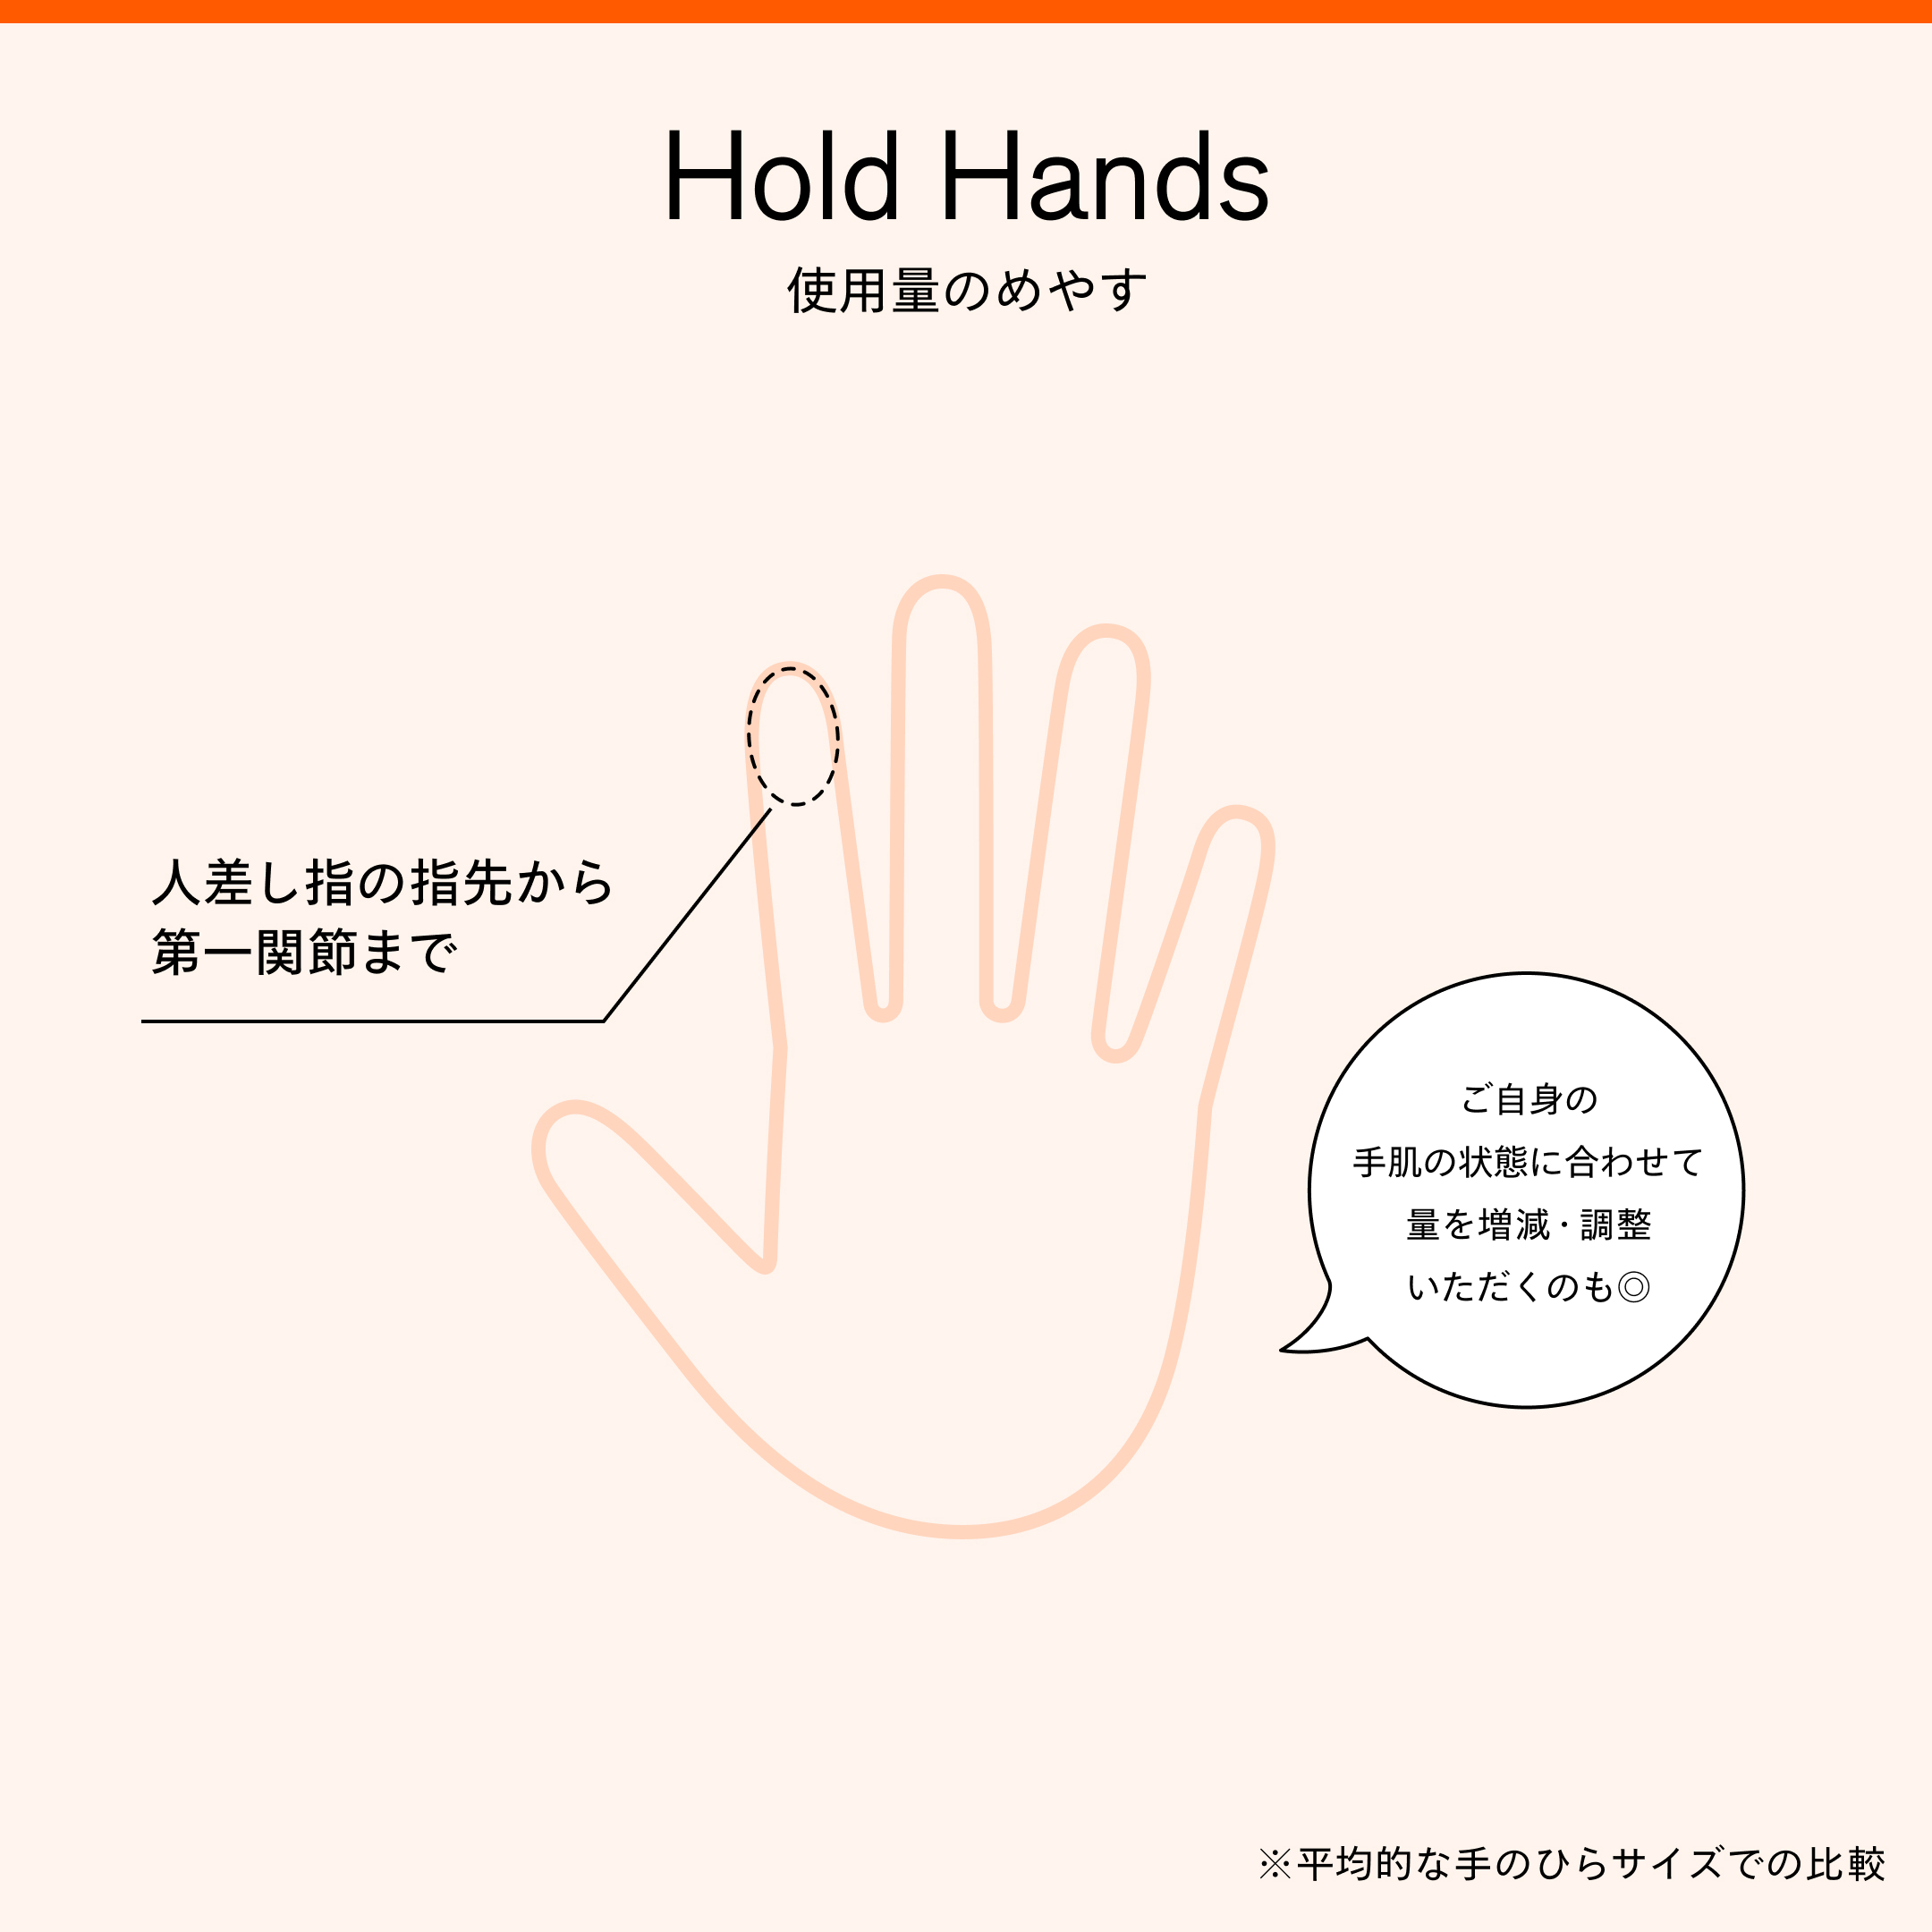 holdhands_howtouse_001.jpg